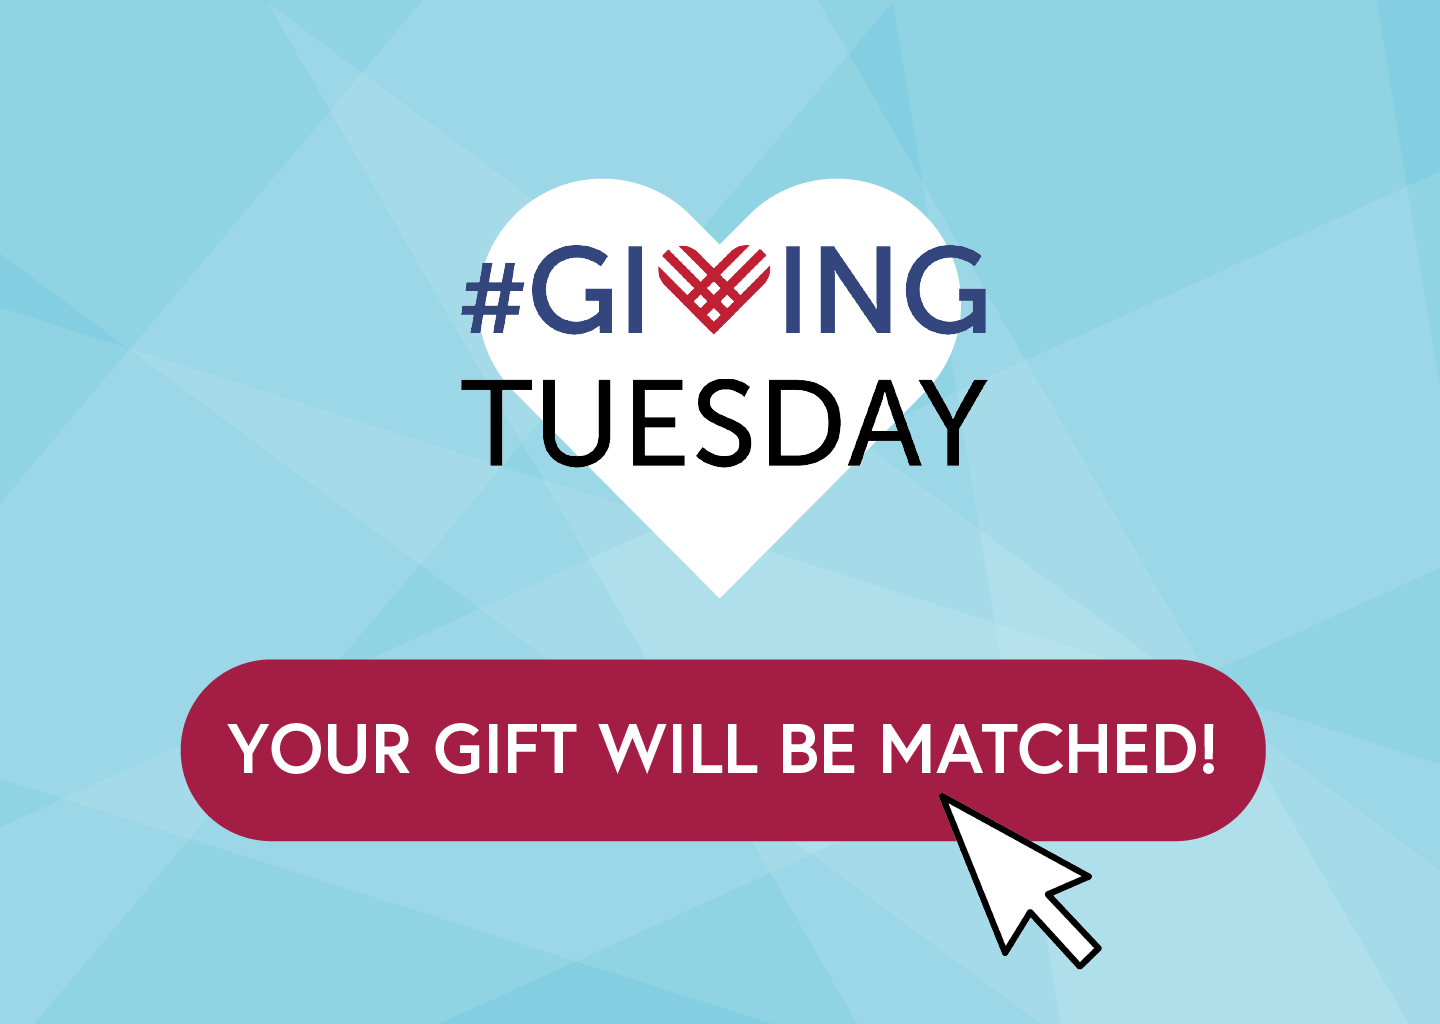 How to Combine Giving Tuesday with a Matching Fund Campaign